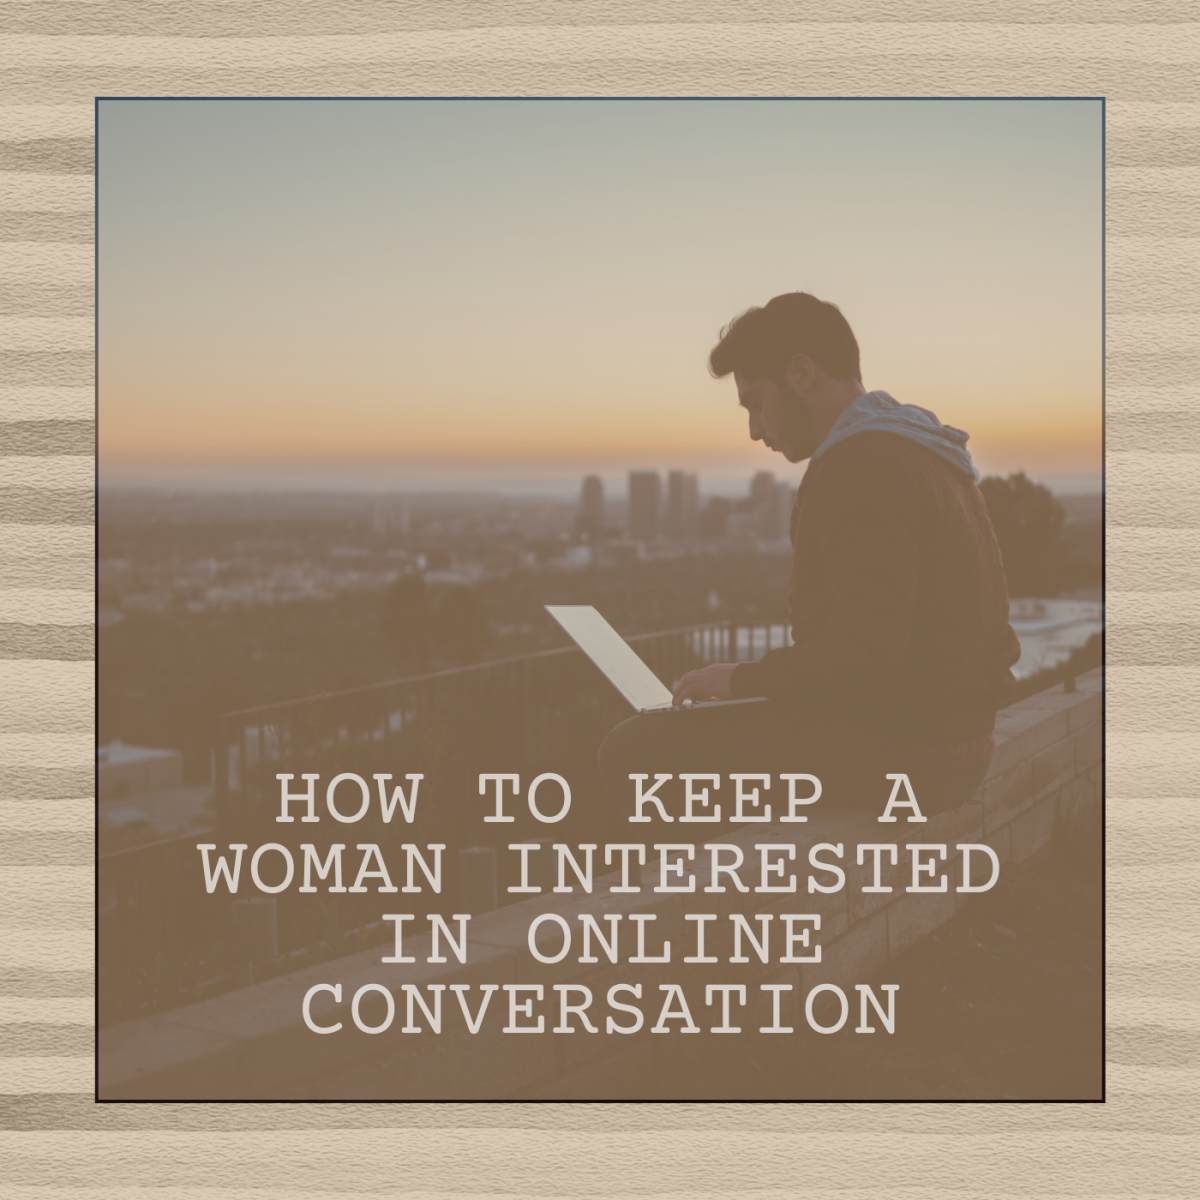 How to Keep a Woman Interested in Online Conversation